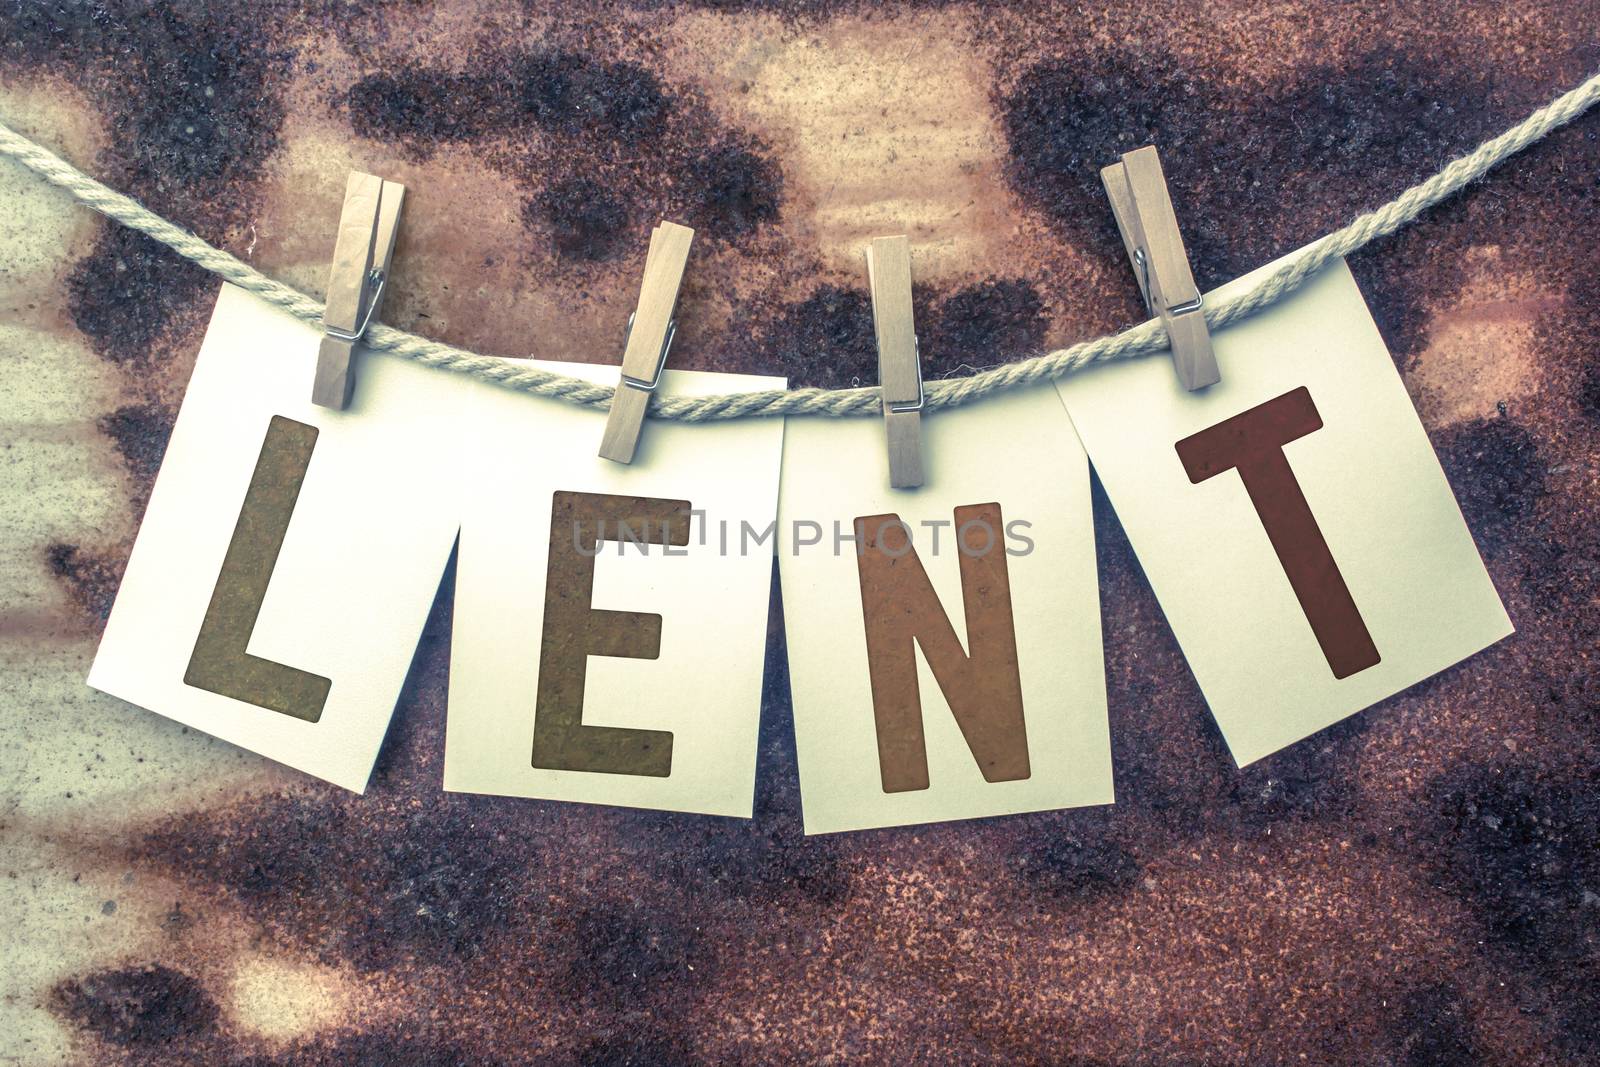 The word "LENT" stamped on cards and pinned to an old piece of twine over a rusted metal background.